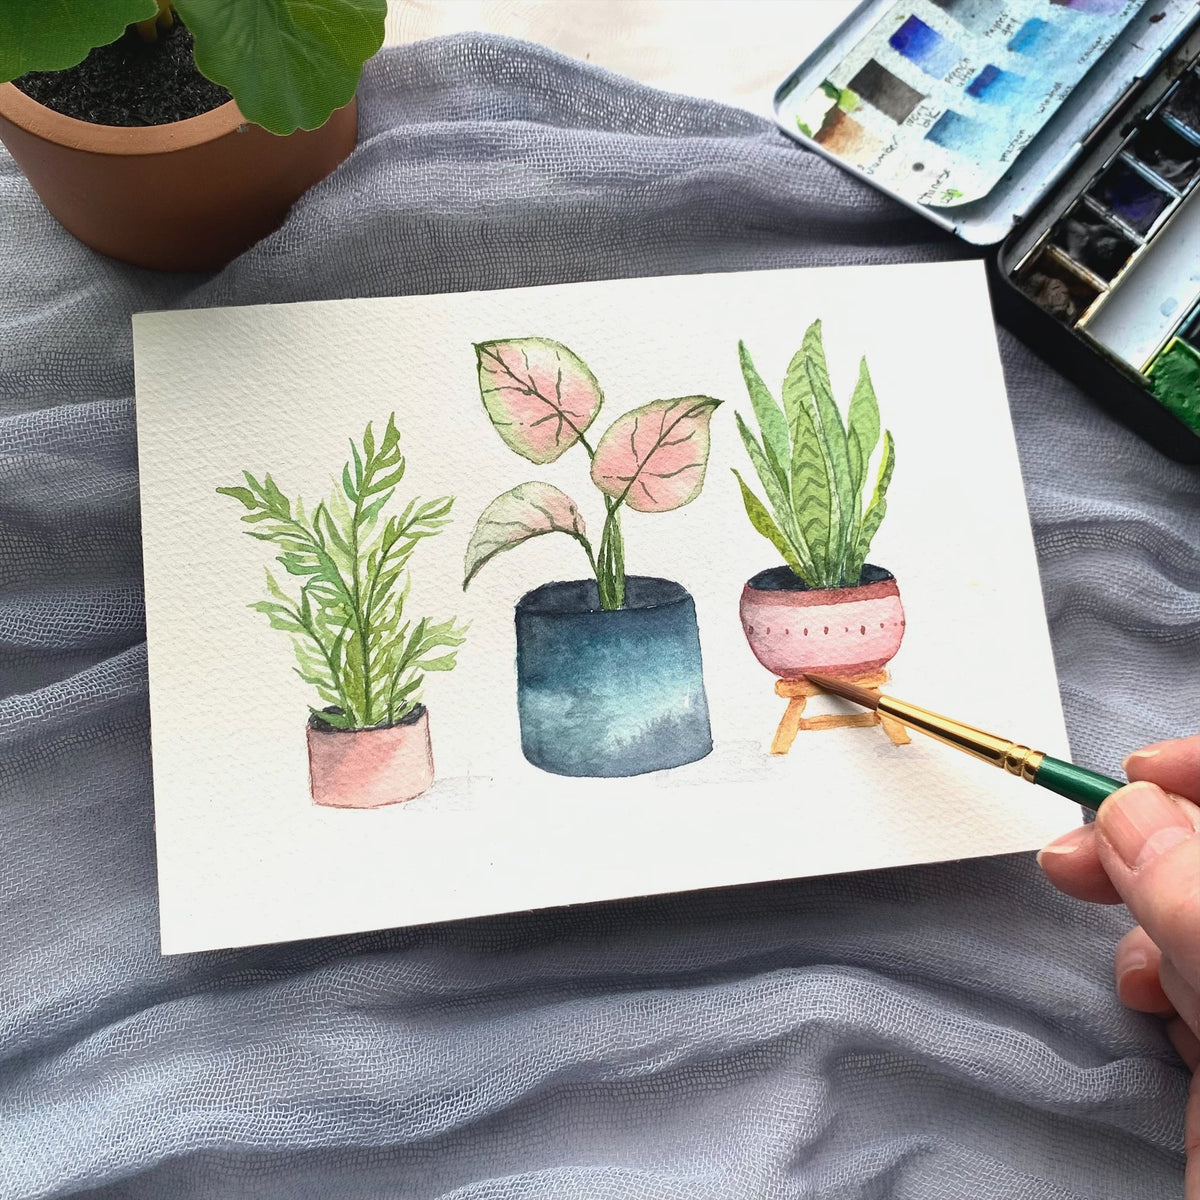 Houseplants Beginner Watercolor Workshop - May 6th from 12-2:30 pm. - Gift & Gather